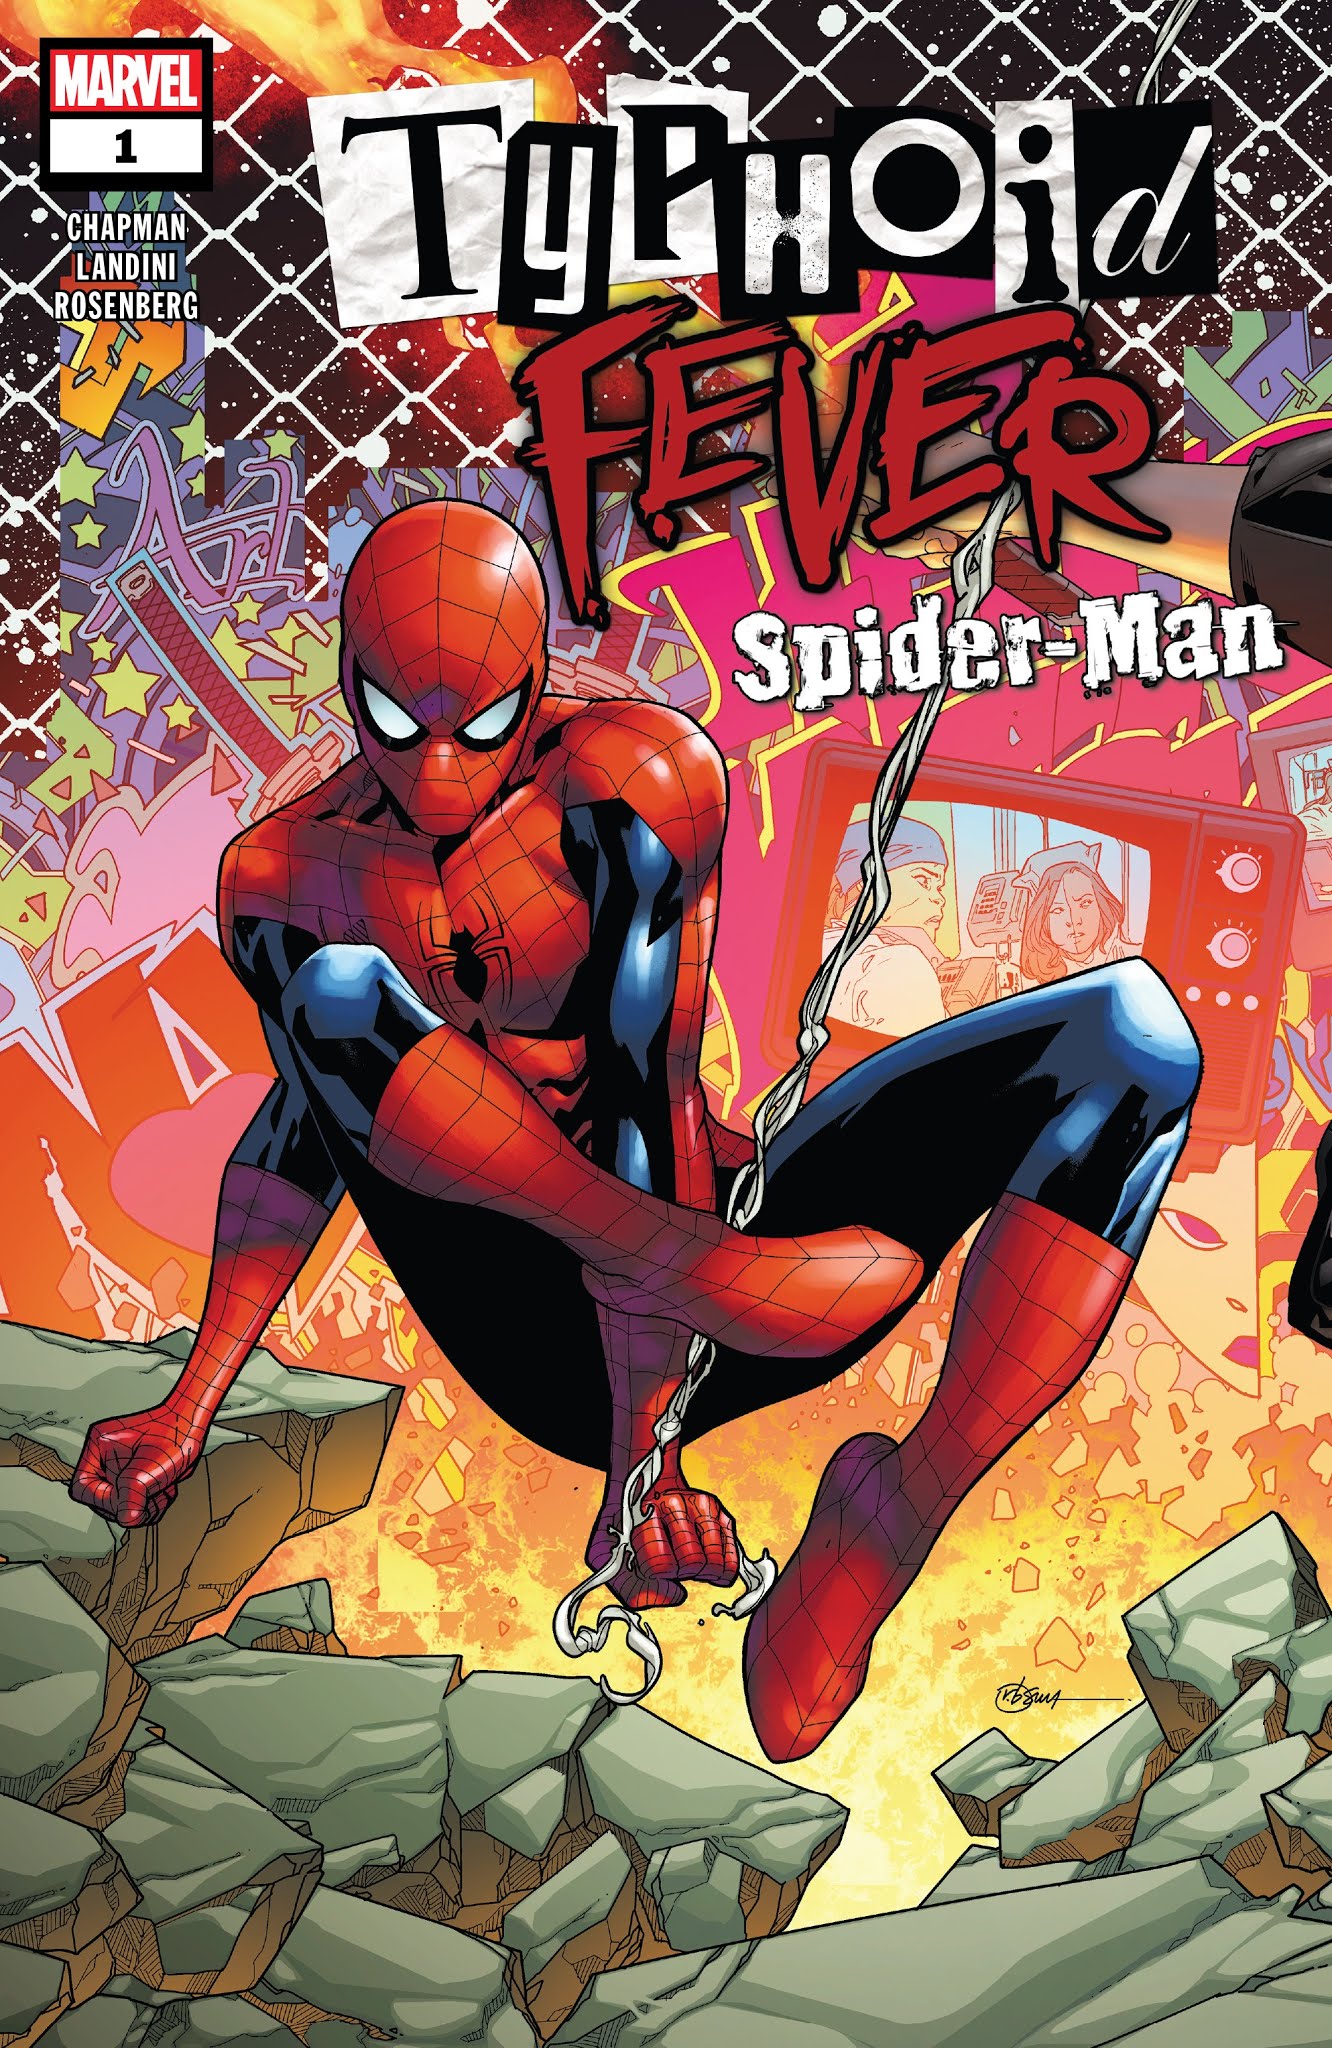 Read online Typhoid Fever Spider-Man comic -  Issue # Full - 1